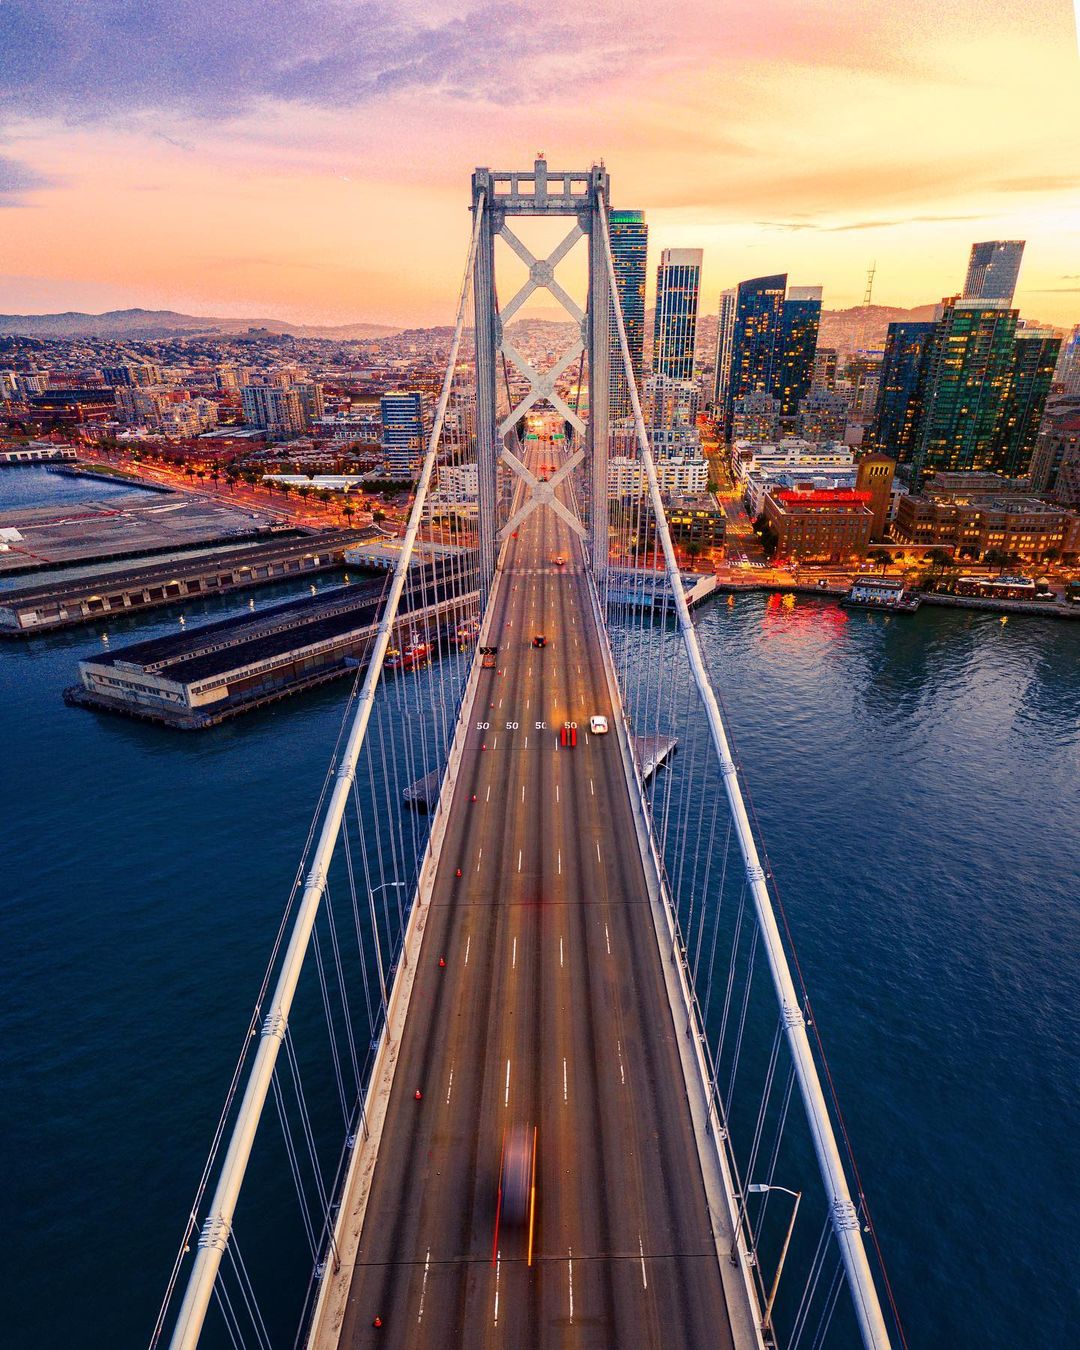 View of the Bay Bridge in San Francisco, CA at Dusk. Photo by Instagram user @bersonphotos